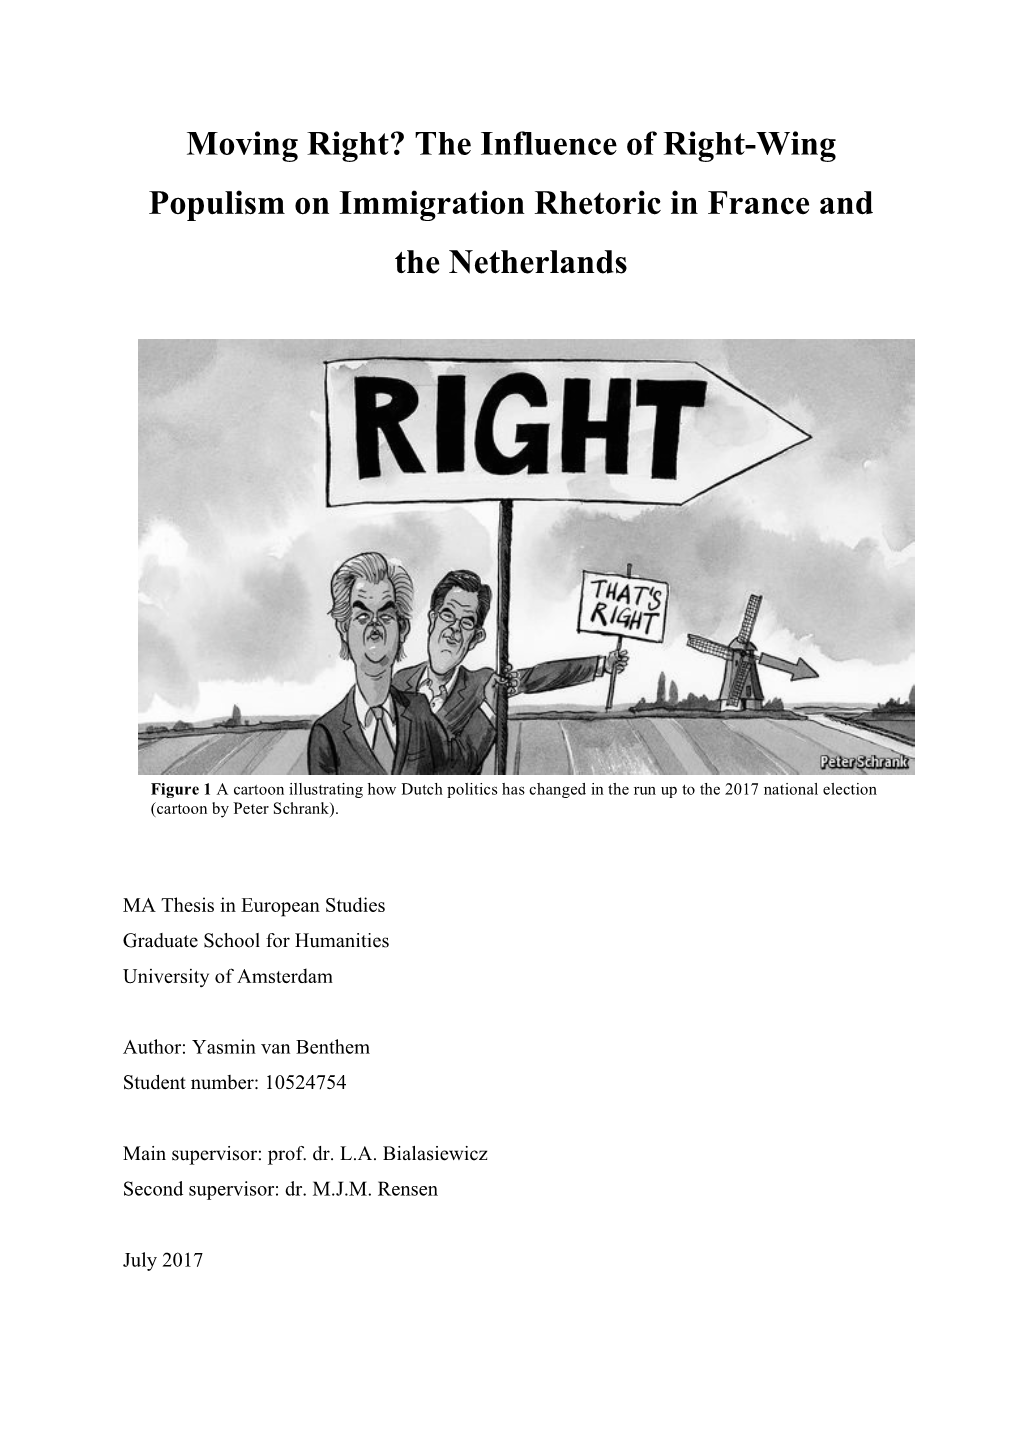 The Influence of Right-Wing Populism on Immigration Rhetoric in France and the Netherlands